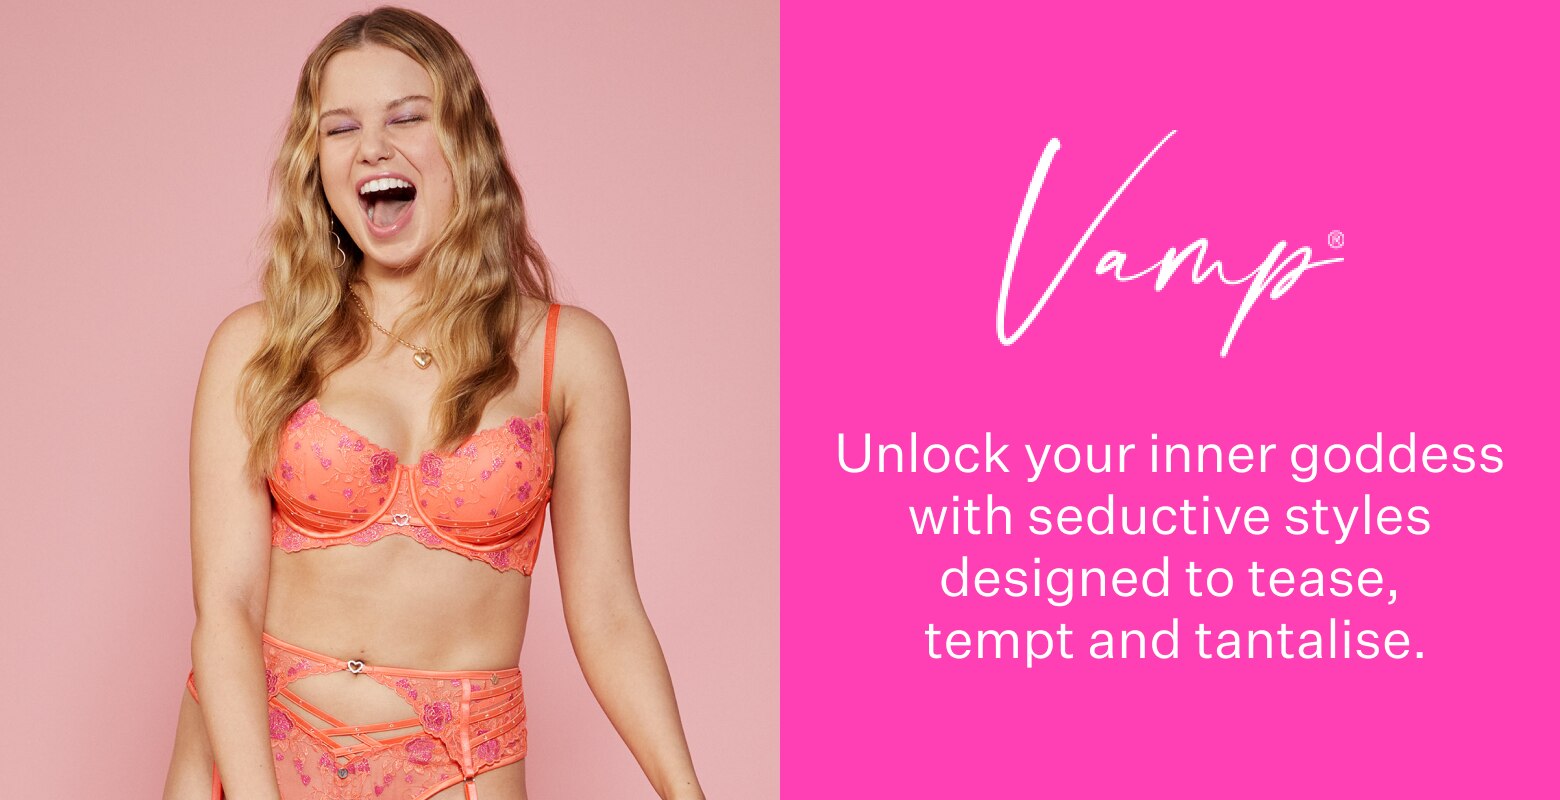 Vamp. Unlock your inner goddess with seductive styles designed to tease, tempt and tantalise.